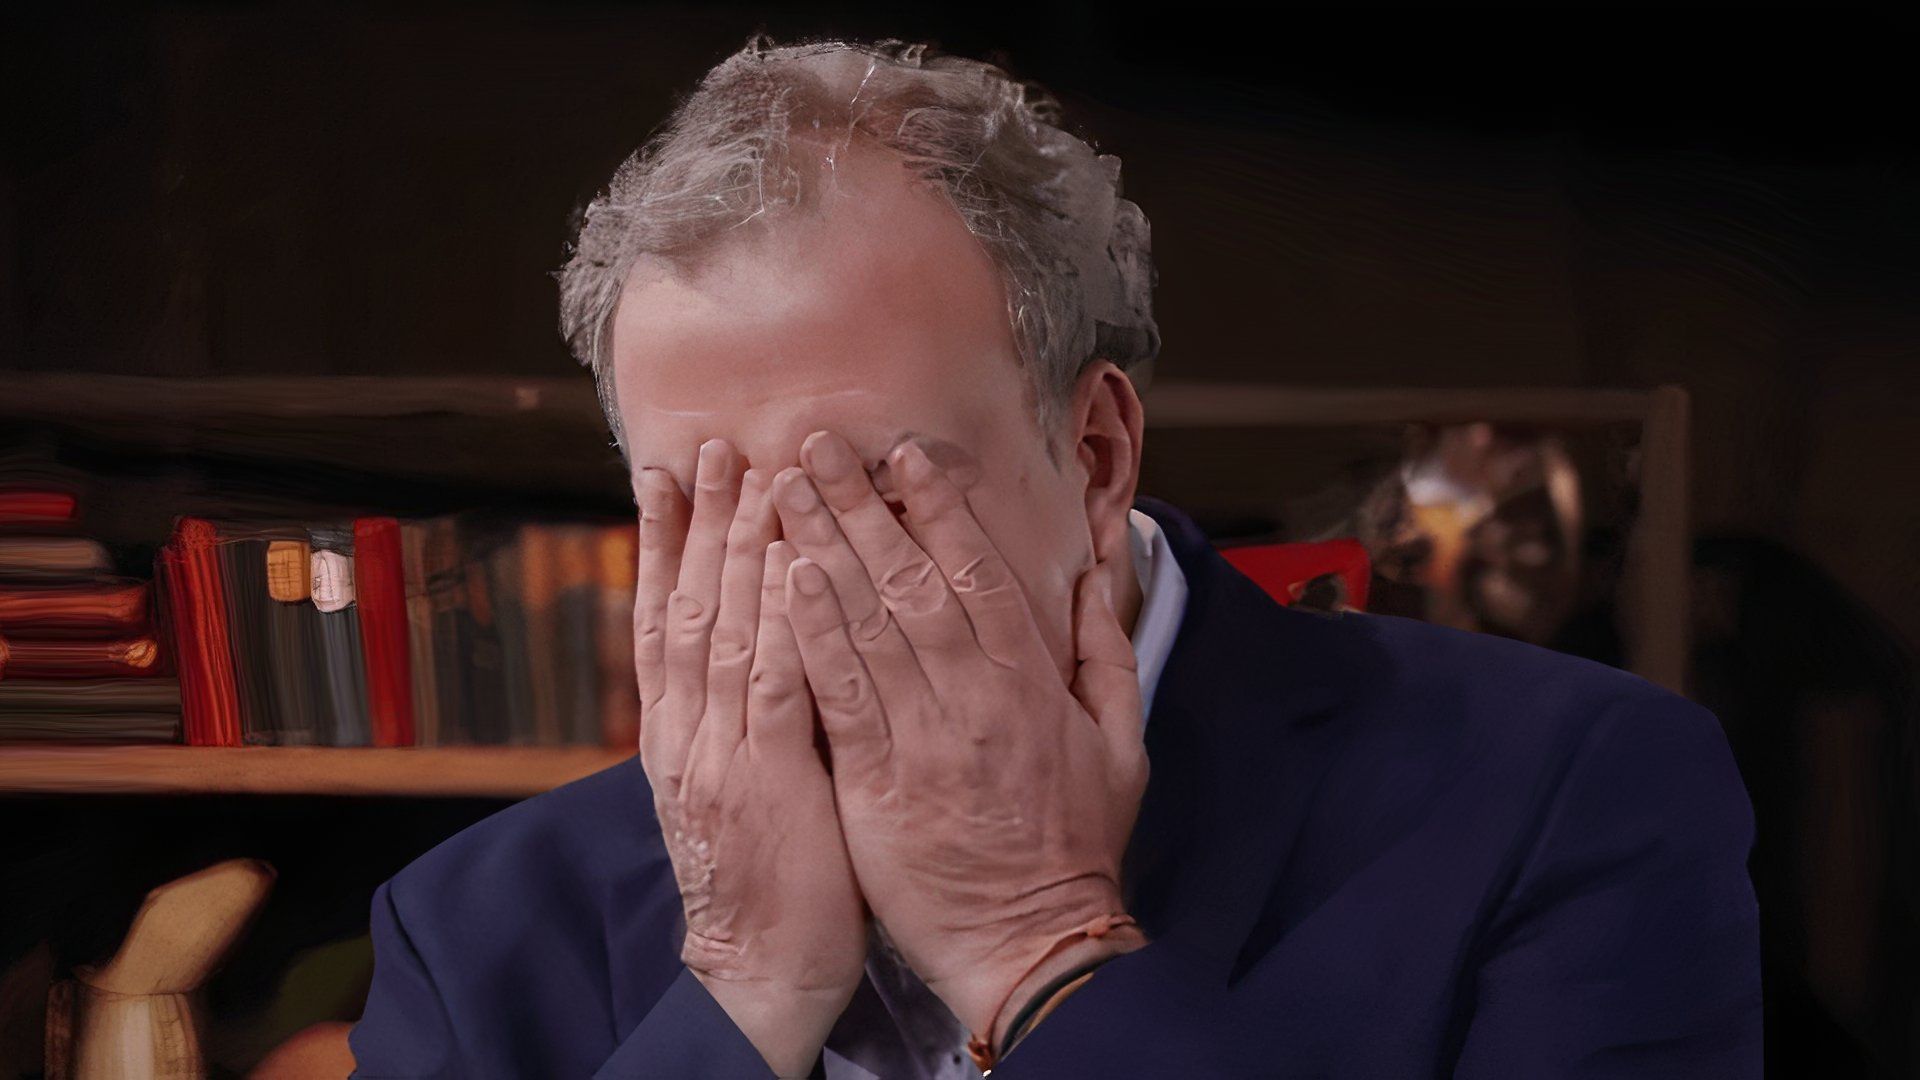 Jeremy Clarkson announcing the end of The Grand Tour